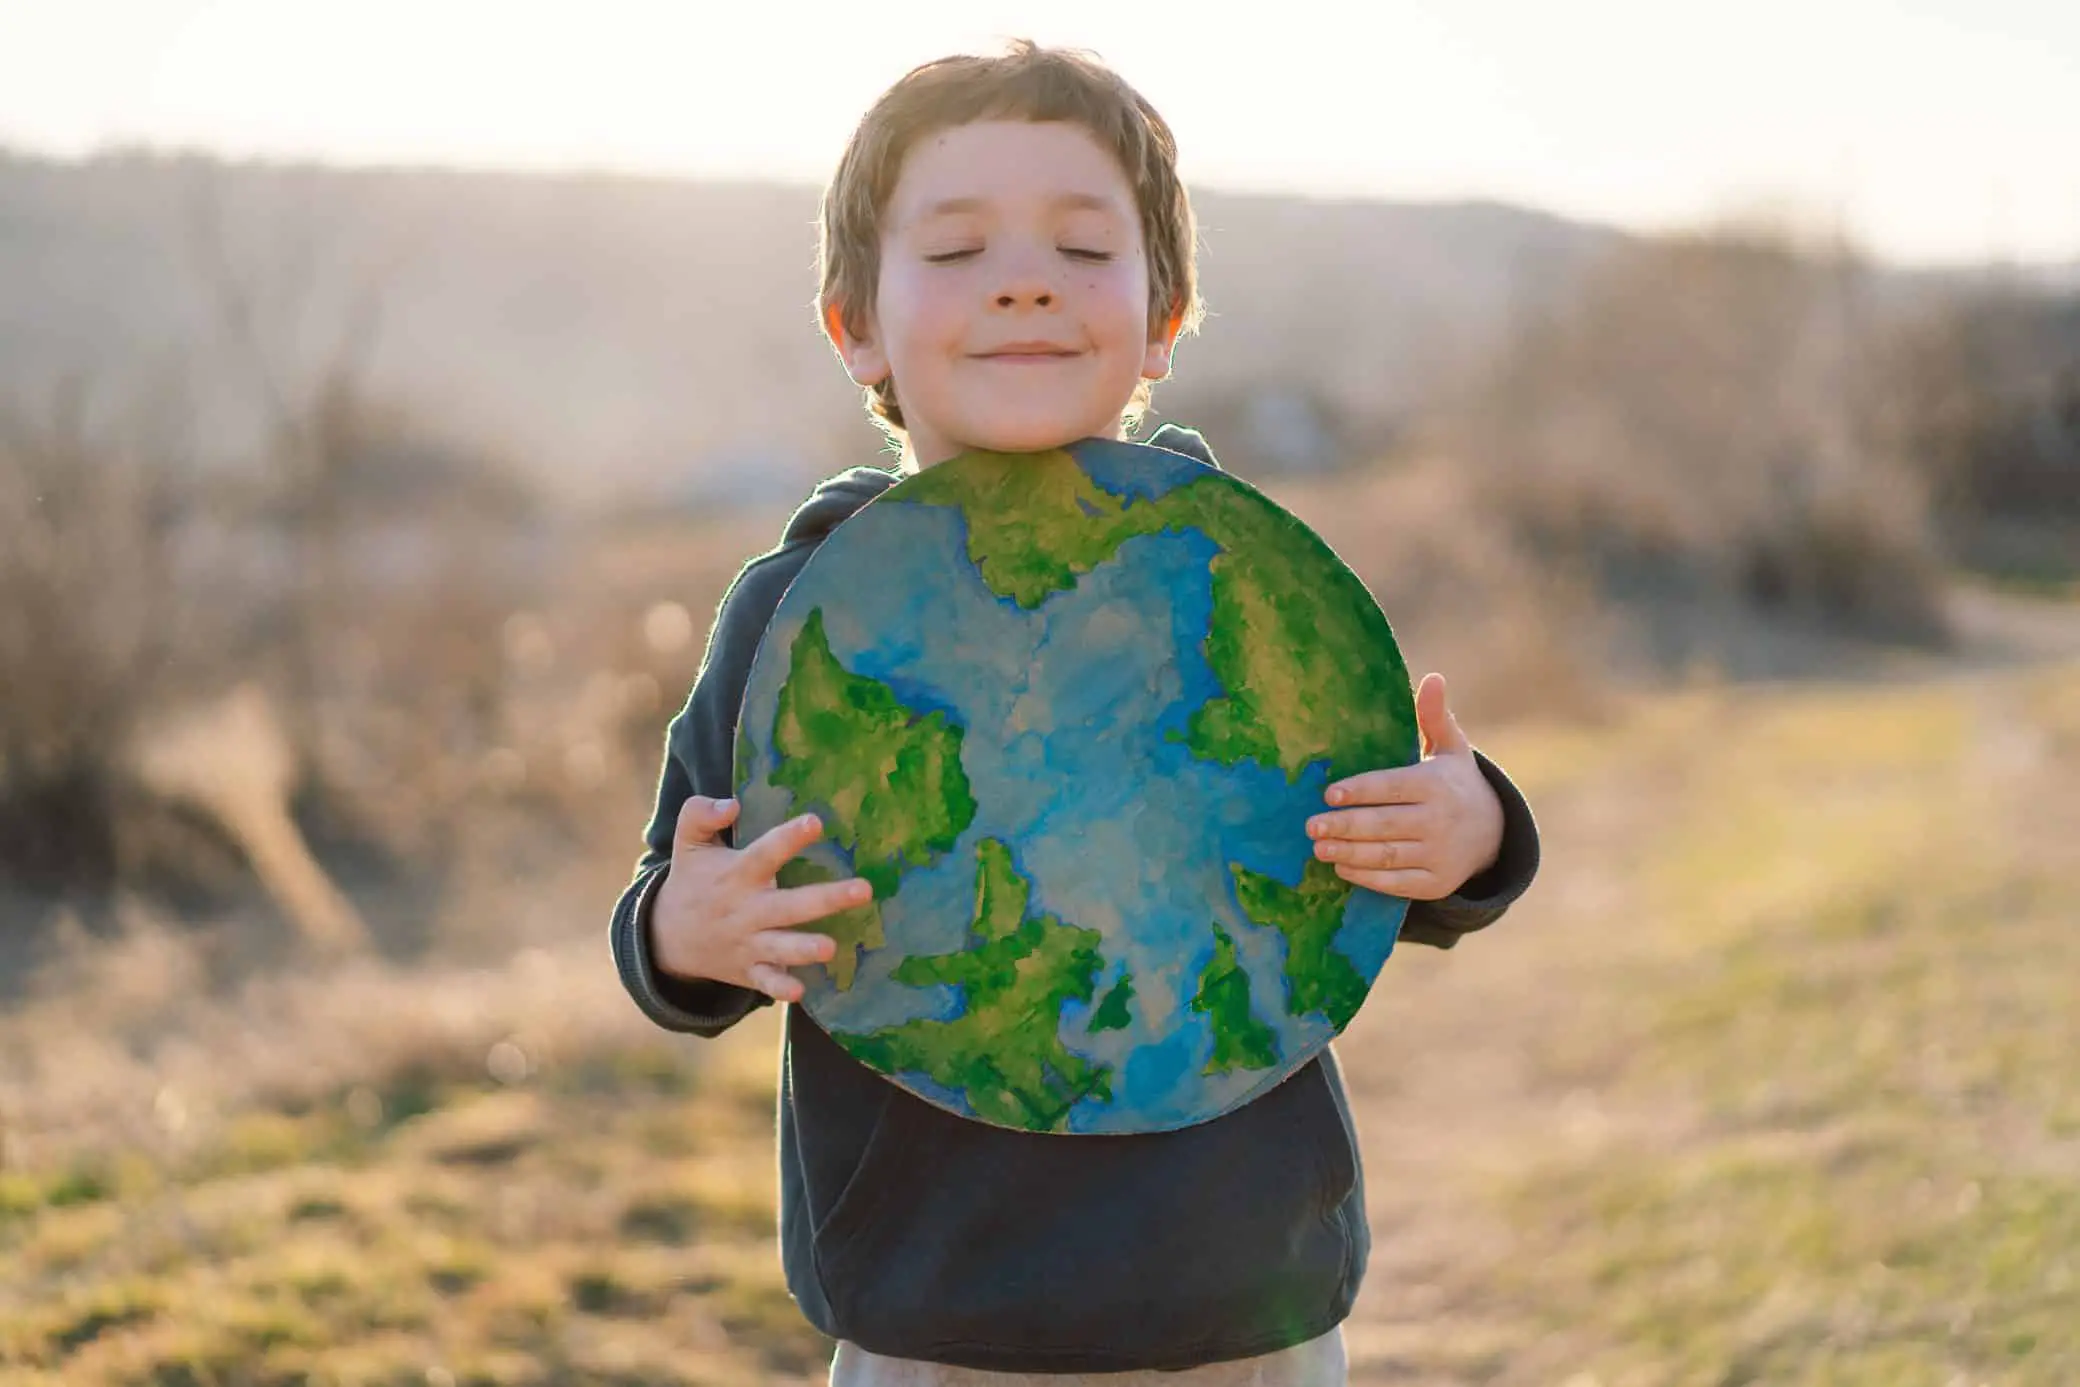 Little Boy Holding Planet In Hands Against Green Spring Background. Earth Day